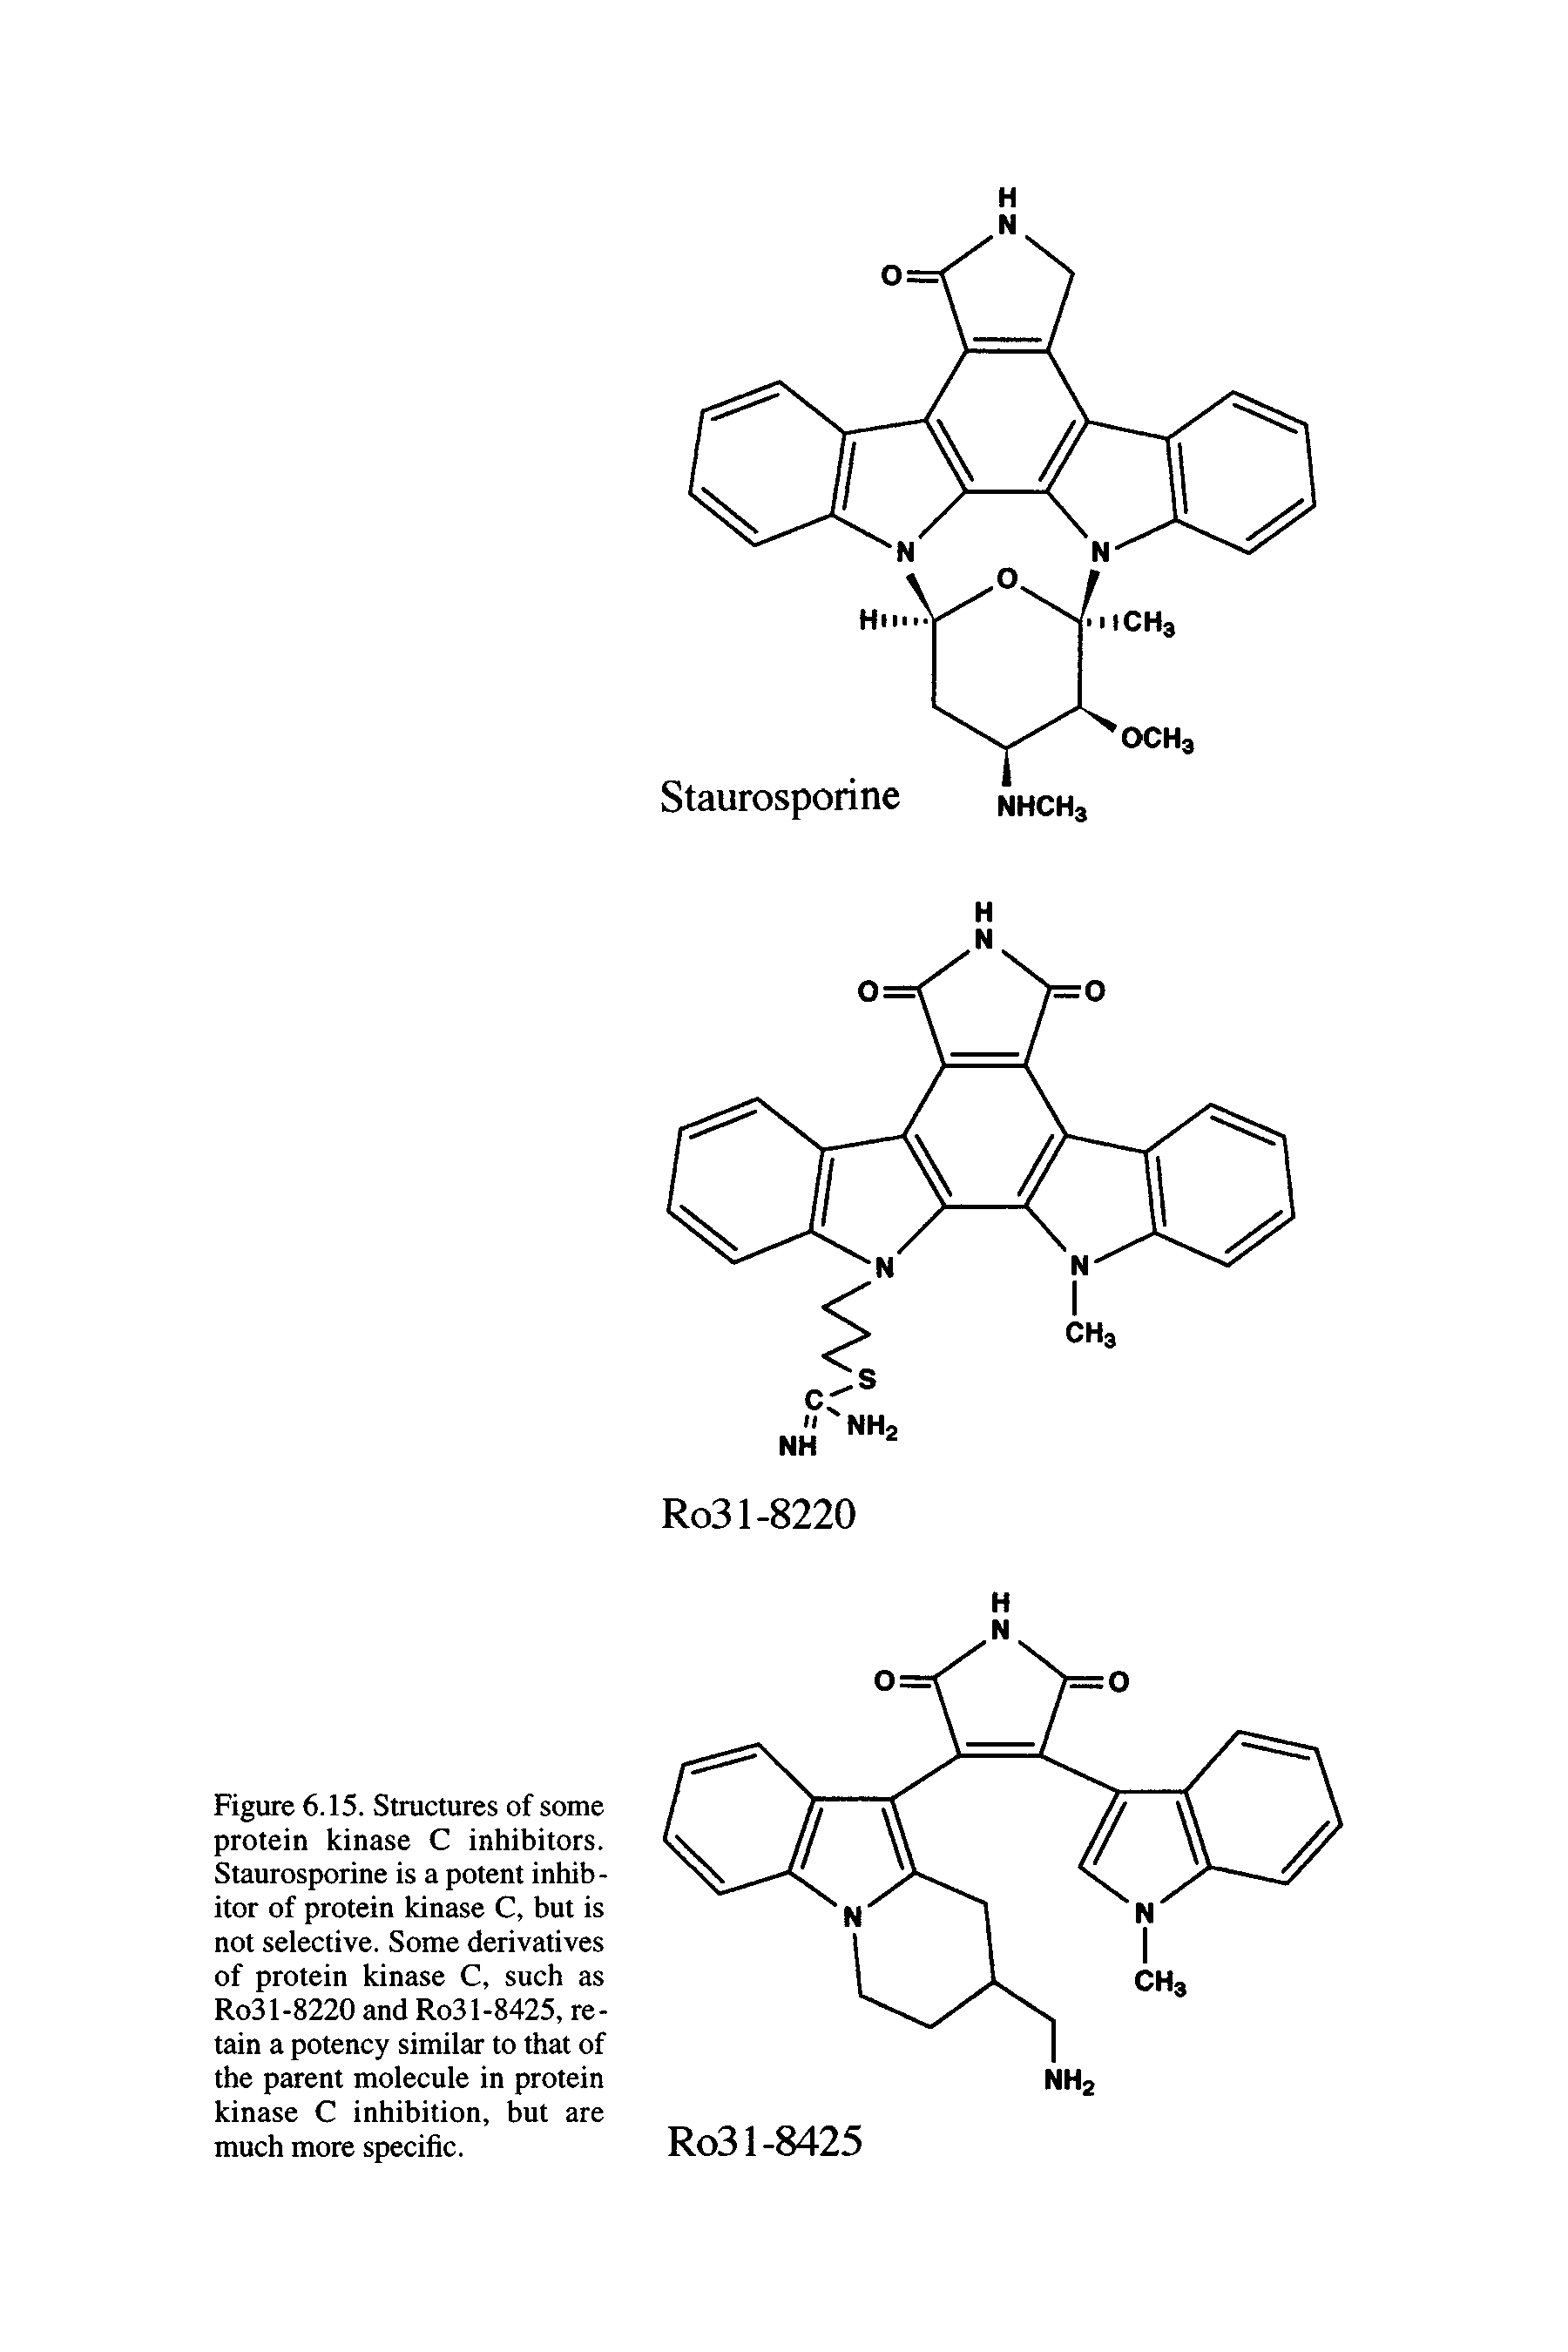 Figure 6.15. Structures of some protein kinase C inhibitors. Staurosporine is a potent inhibitor of protein kinase C, but is not selective. Some derivatives of protein kinase C, such as Ro31-8220 and Ro31-8425, retain a potency similar to that of the parent molecule in protein kinase C inhibition, but are much more specific.